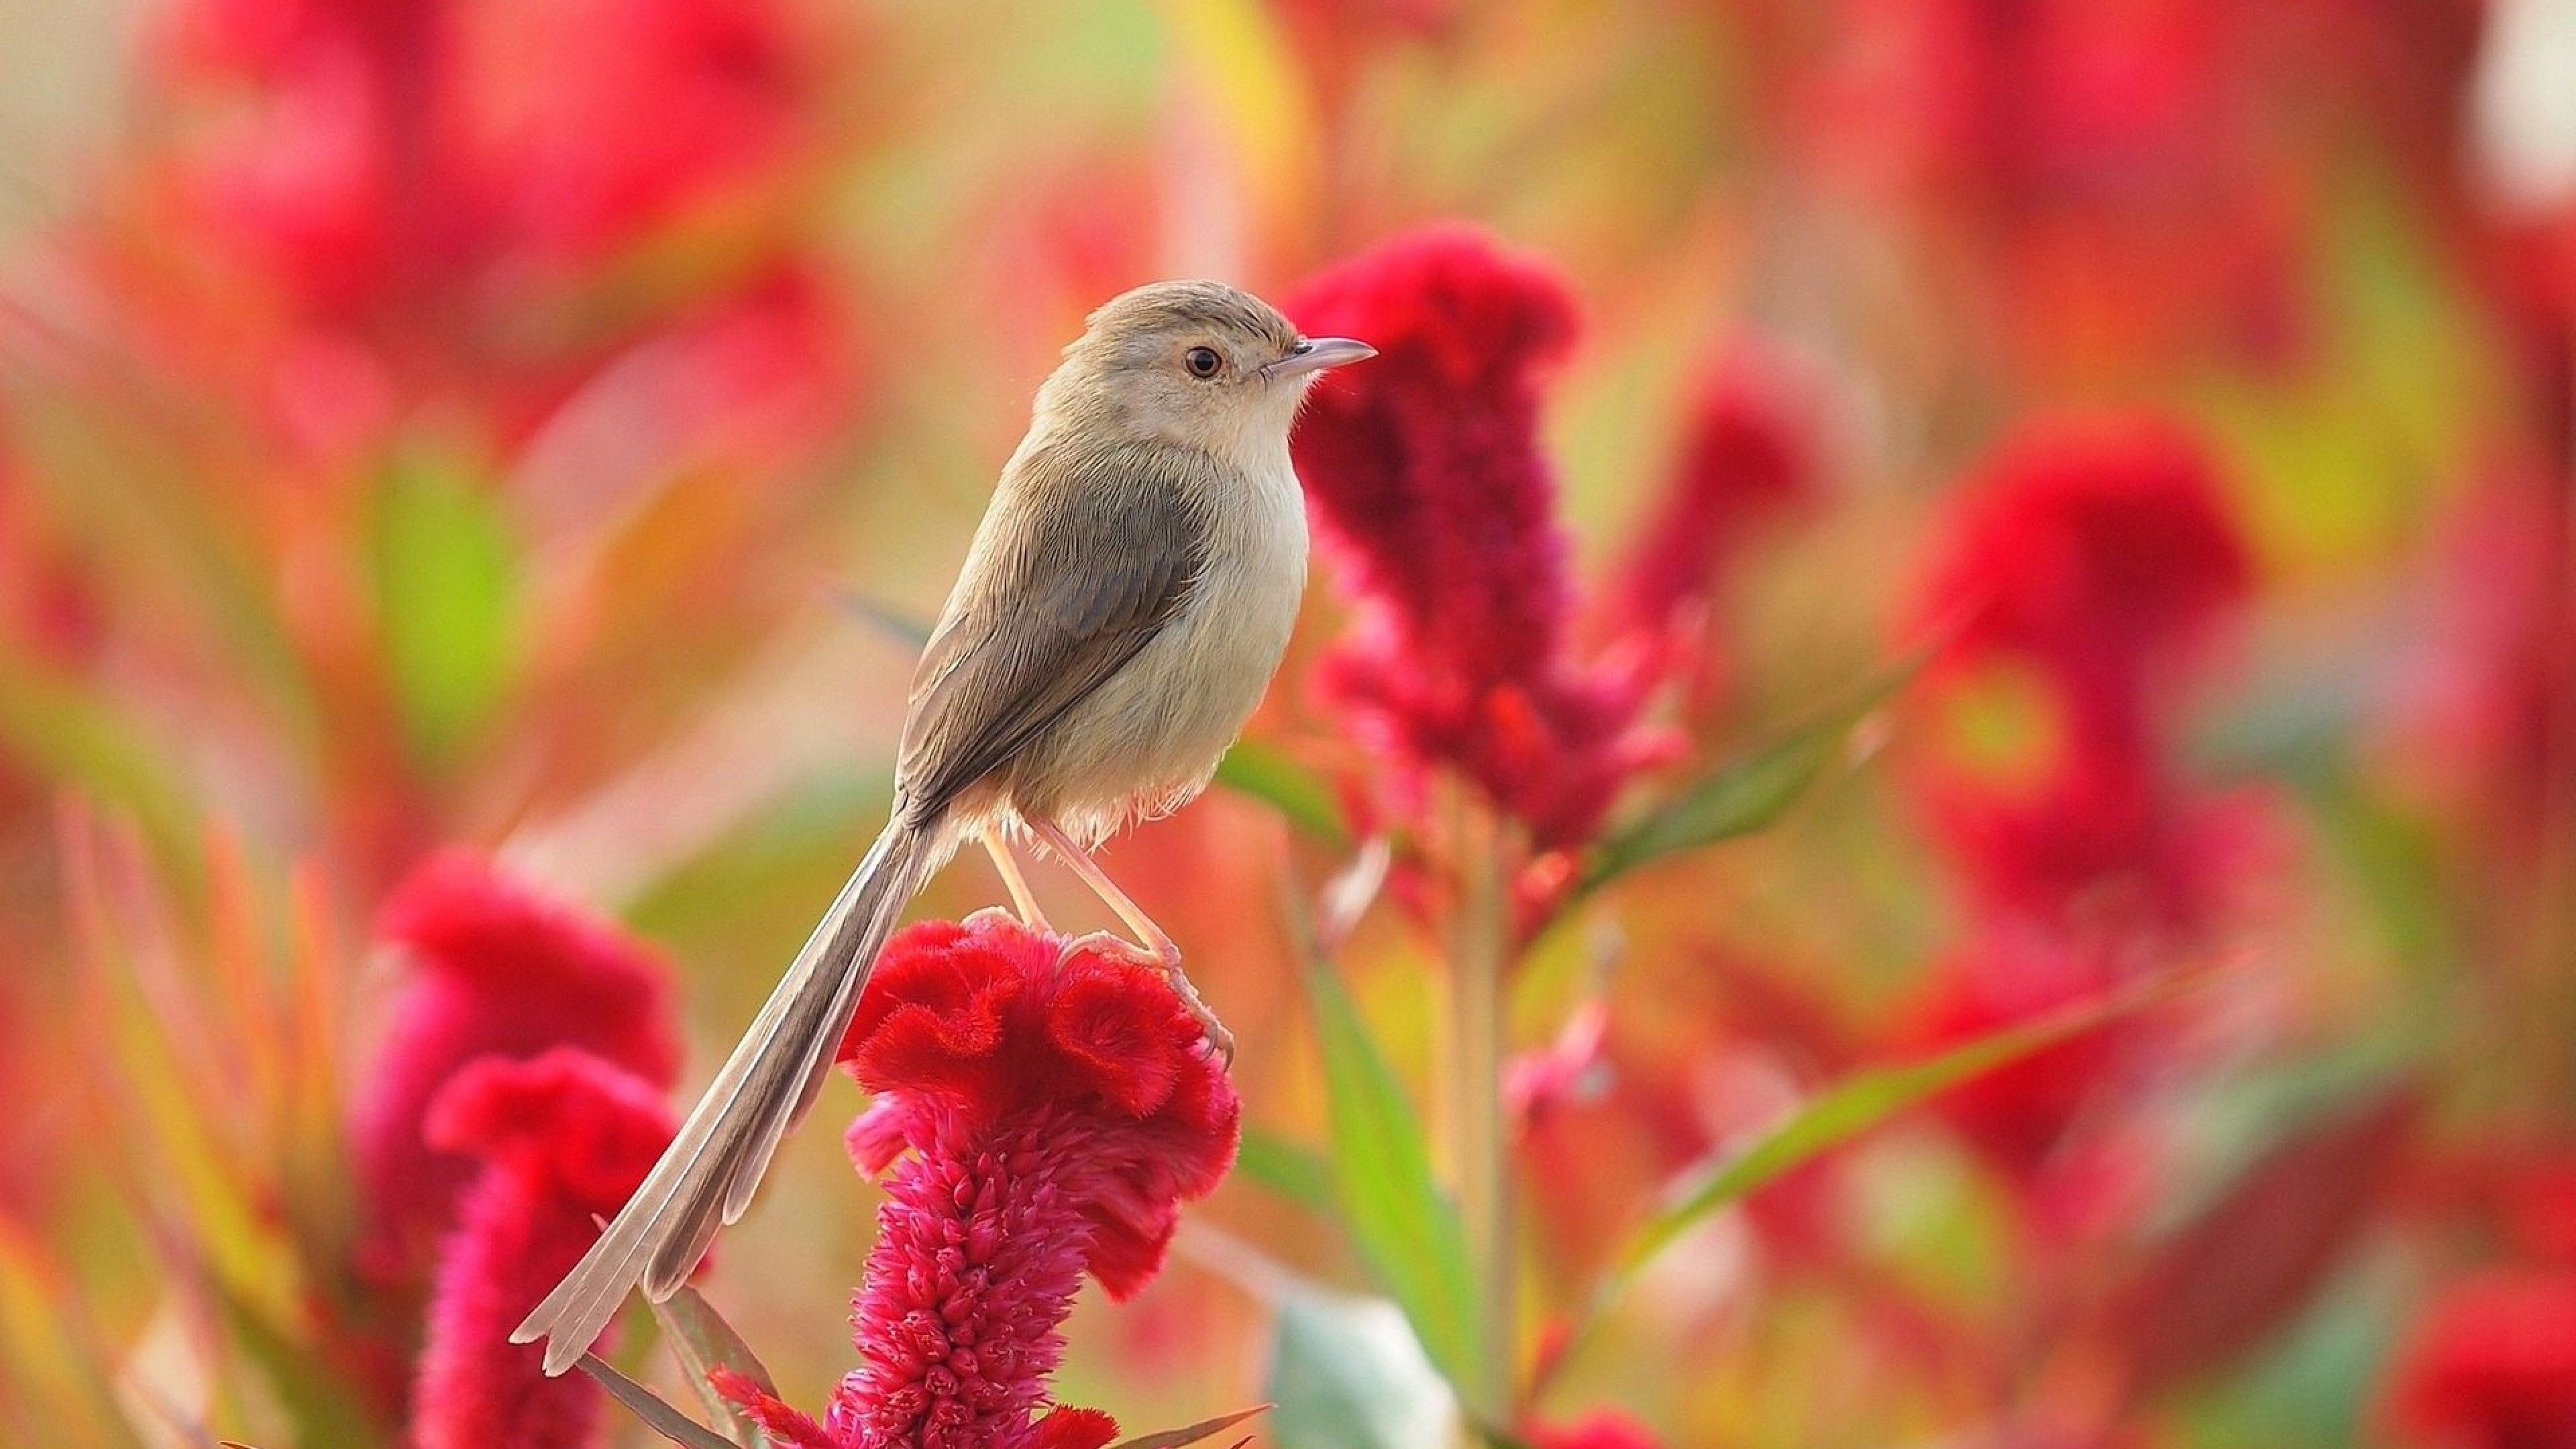 Flowers and Birds Wallpaper for Desktop and Mobile 4K Ultra HD